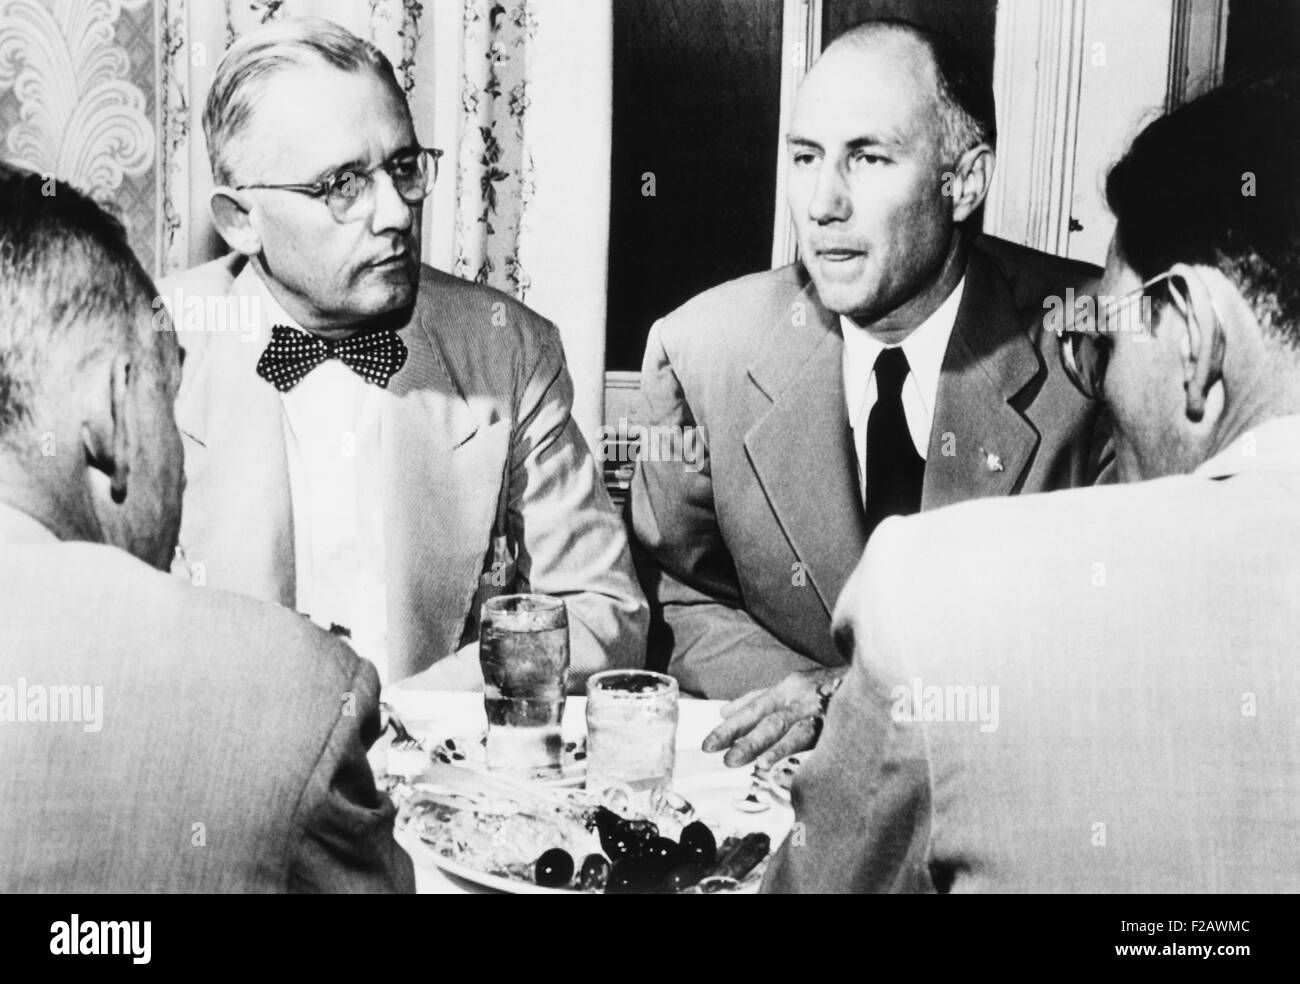 Governor Strom Thurmond of South Carolina meets with Dixiecrat politicians on July 24, 1948. Gov. Thurmond was running for president on the States' Rights Democratic Party, a.k.a. Dixiecrats, to opposition the Civil Rights positions of both the Republican and Democratic parties. They hoped to win enough votes to put the election into the House of Representatives, but Truman won. At left is Mississippi Gov. Fielding Wright, Dixiecrat V.P. candidate. (CSU 2015 11 1305) Stock Photo